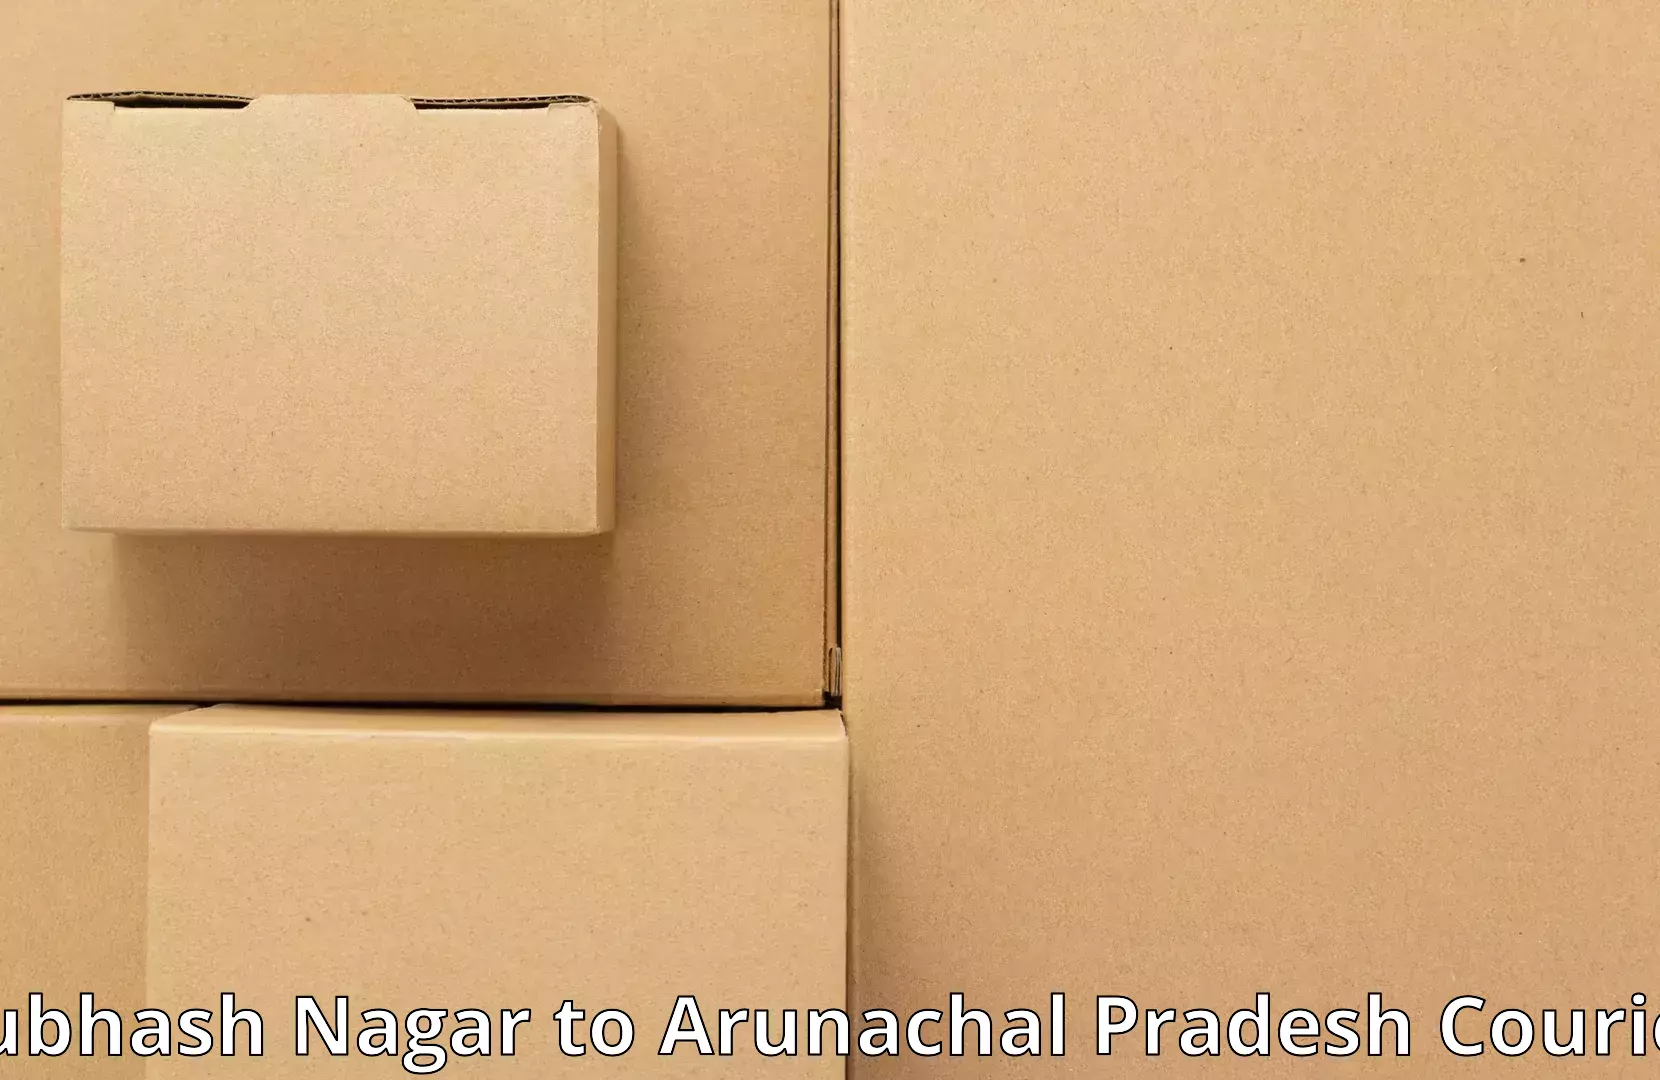 Reliable goods transport in Subhash Nagar to Roing